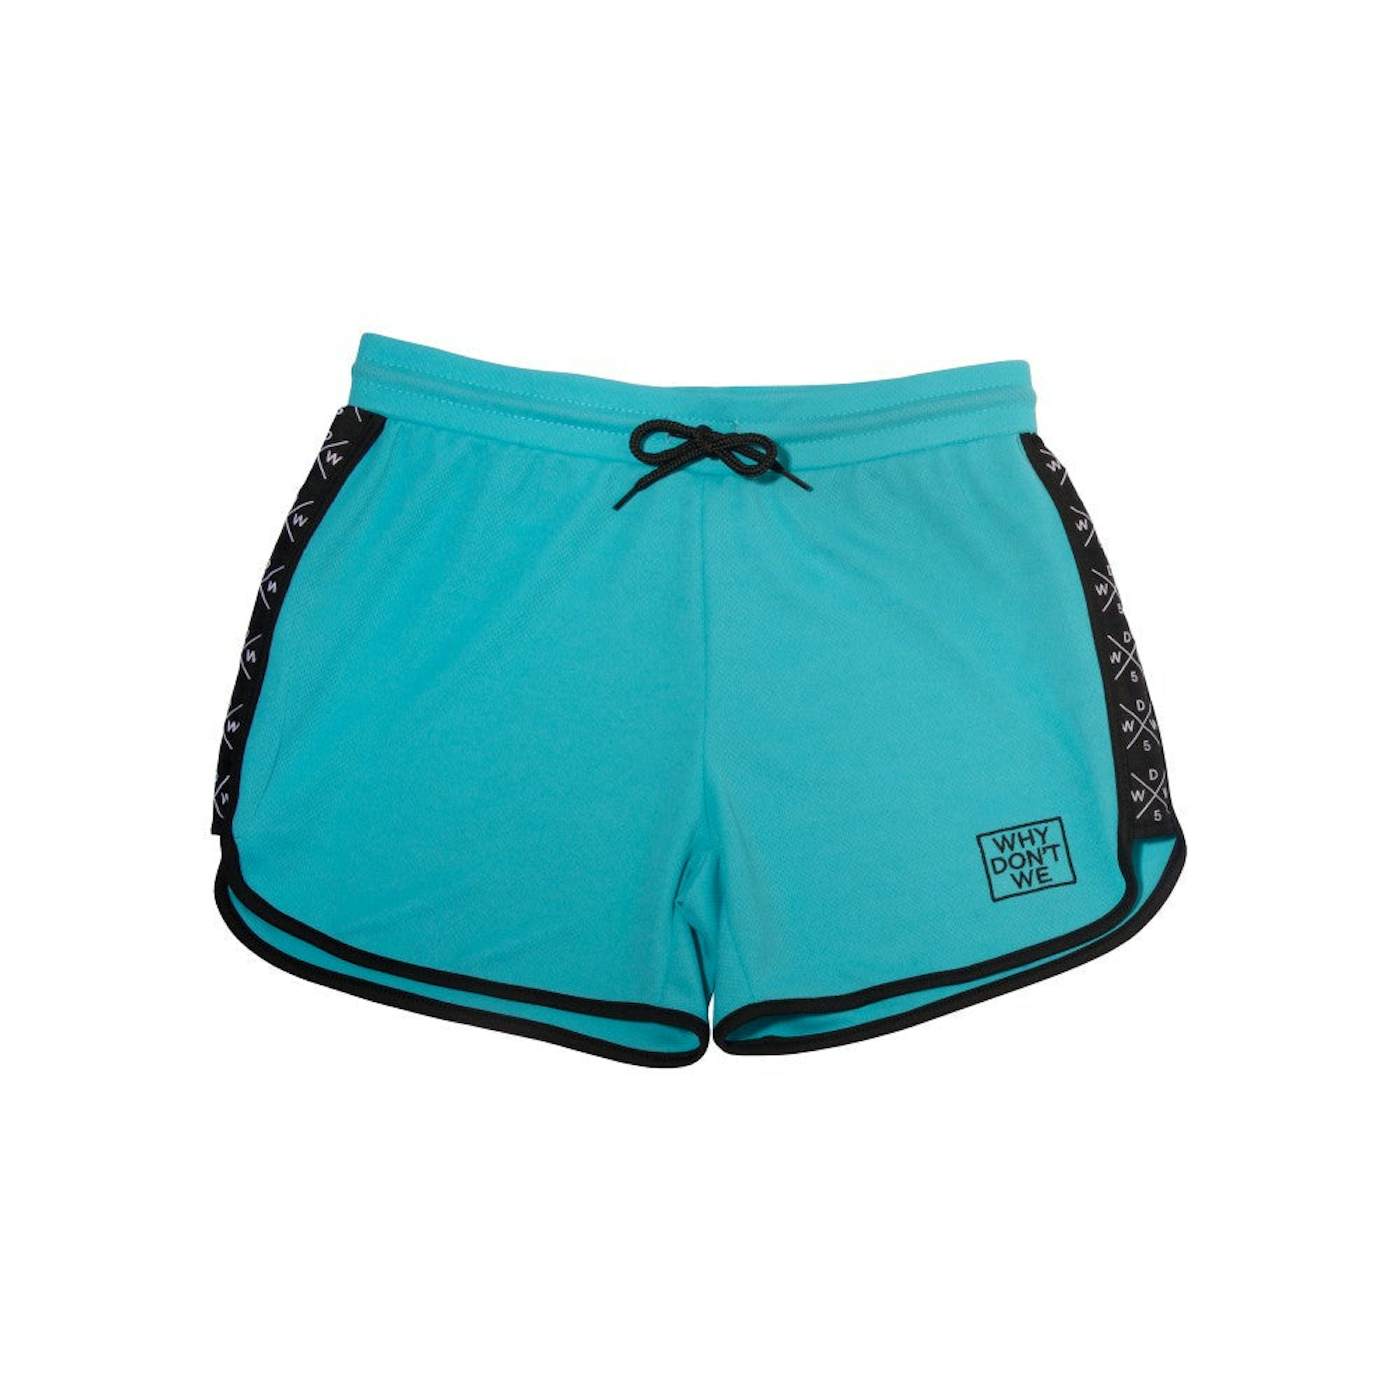 Why Don't We Panel Shorts (Turquoise)